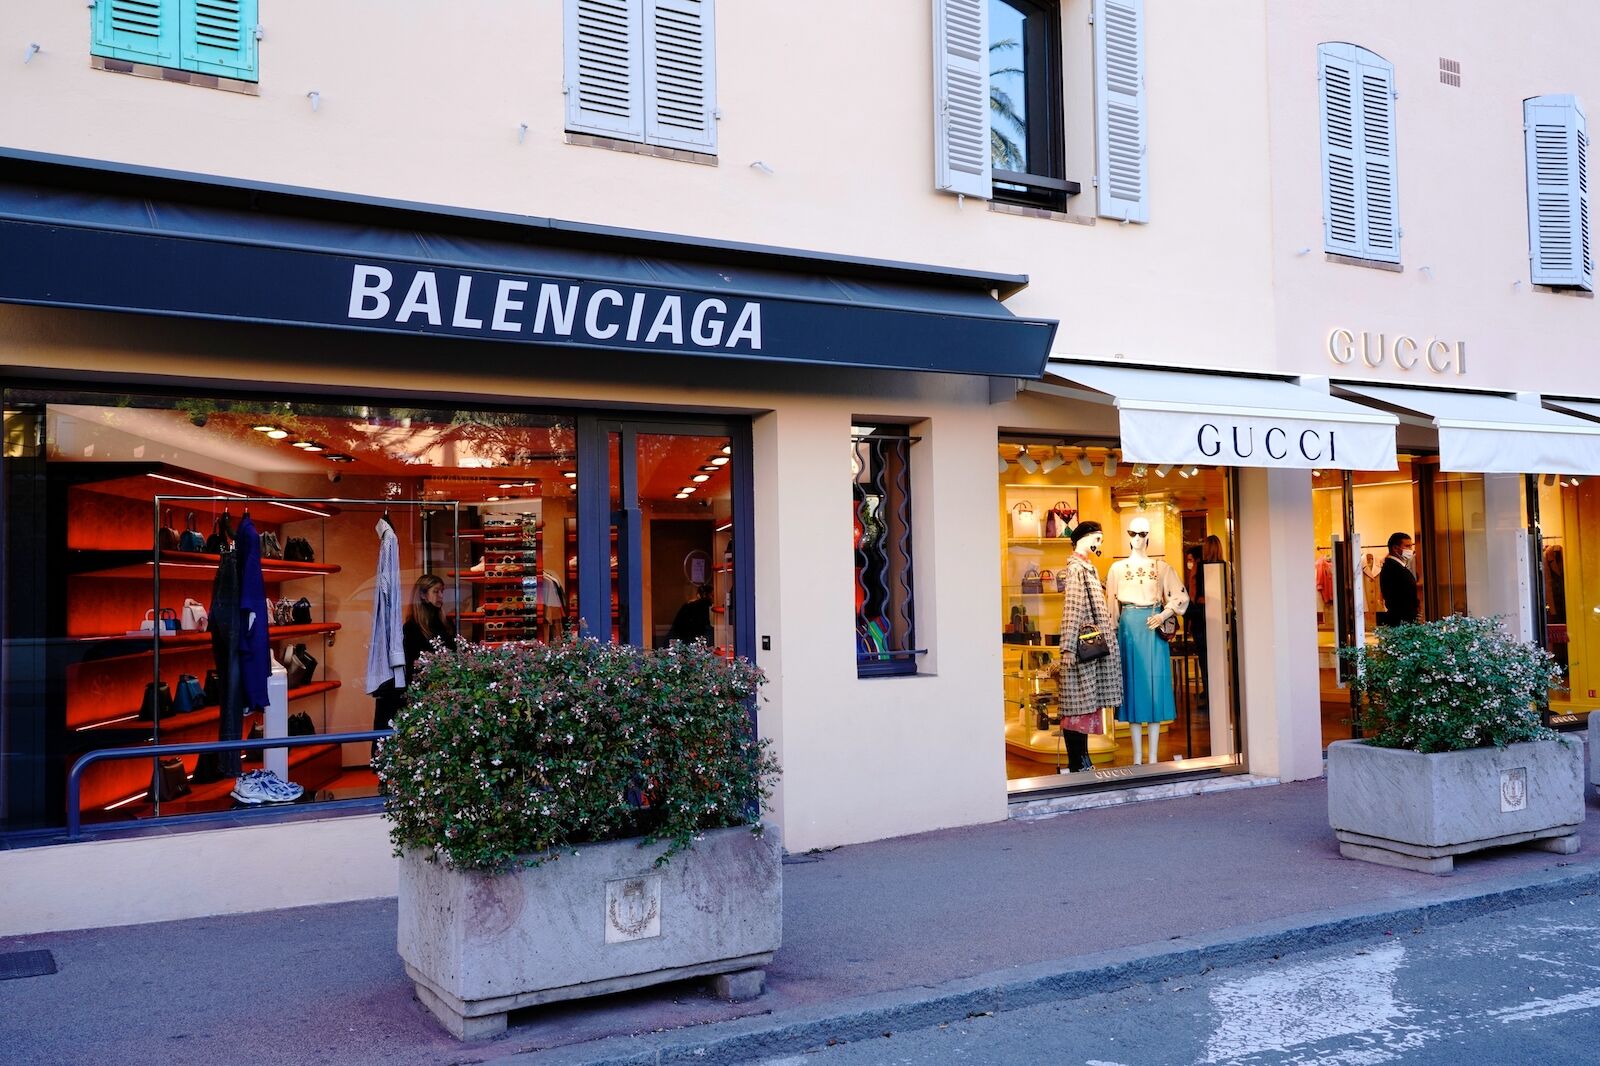 Luxury boutiques lining the streets of St. Tropez, France